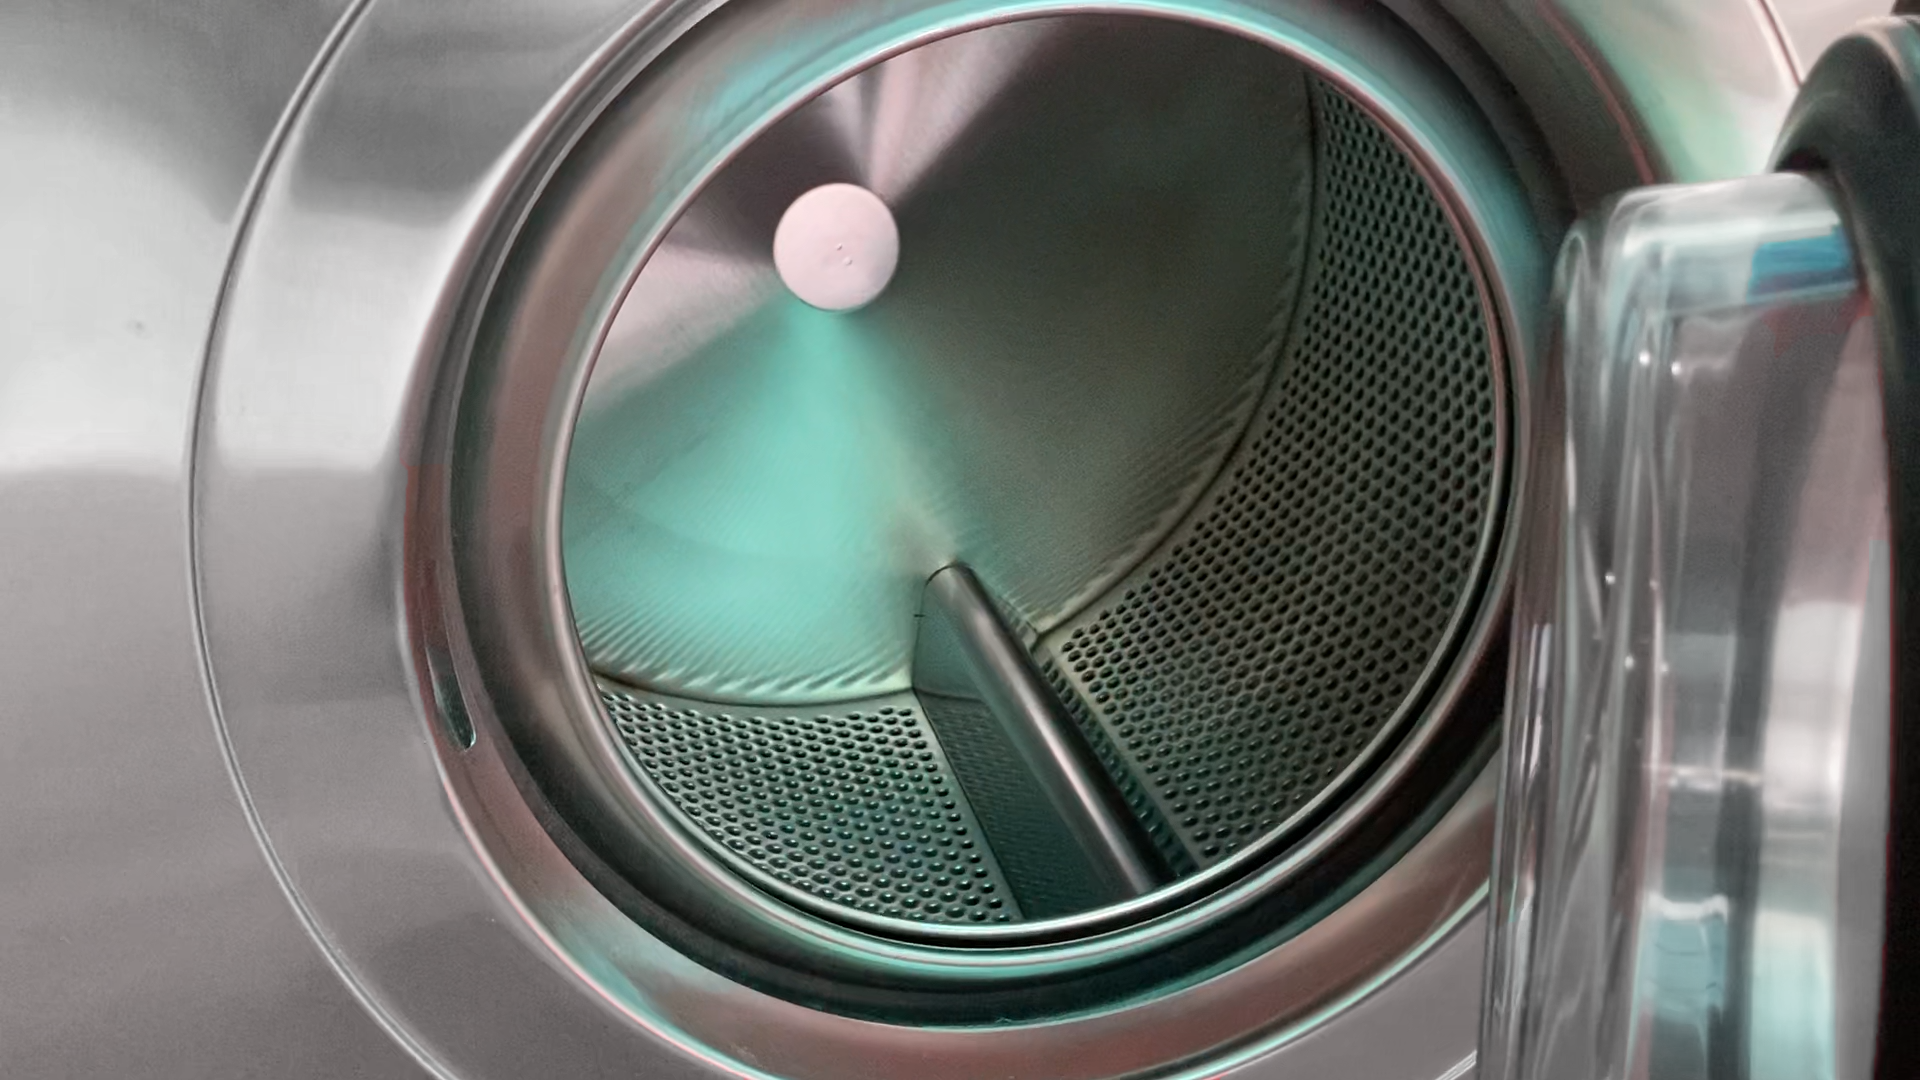 Gas heating industrial washing machine with dryer